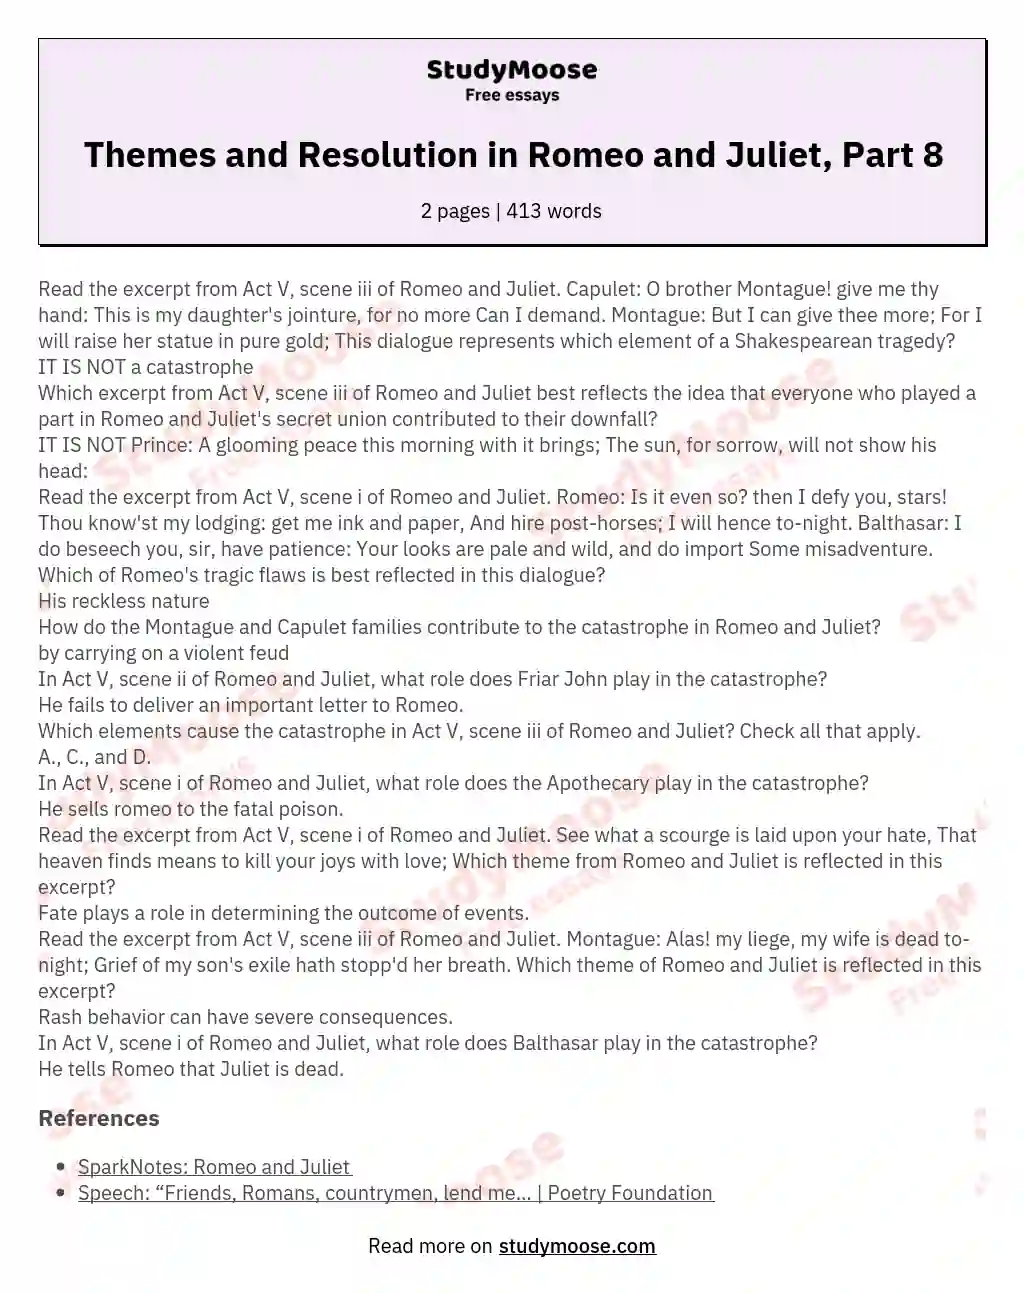 Themes and Resolution in Romeo and Juliet, Part 8 essay